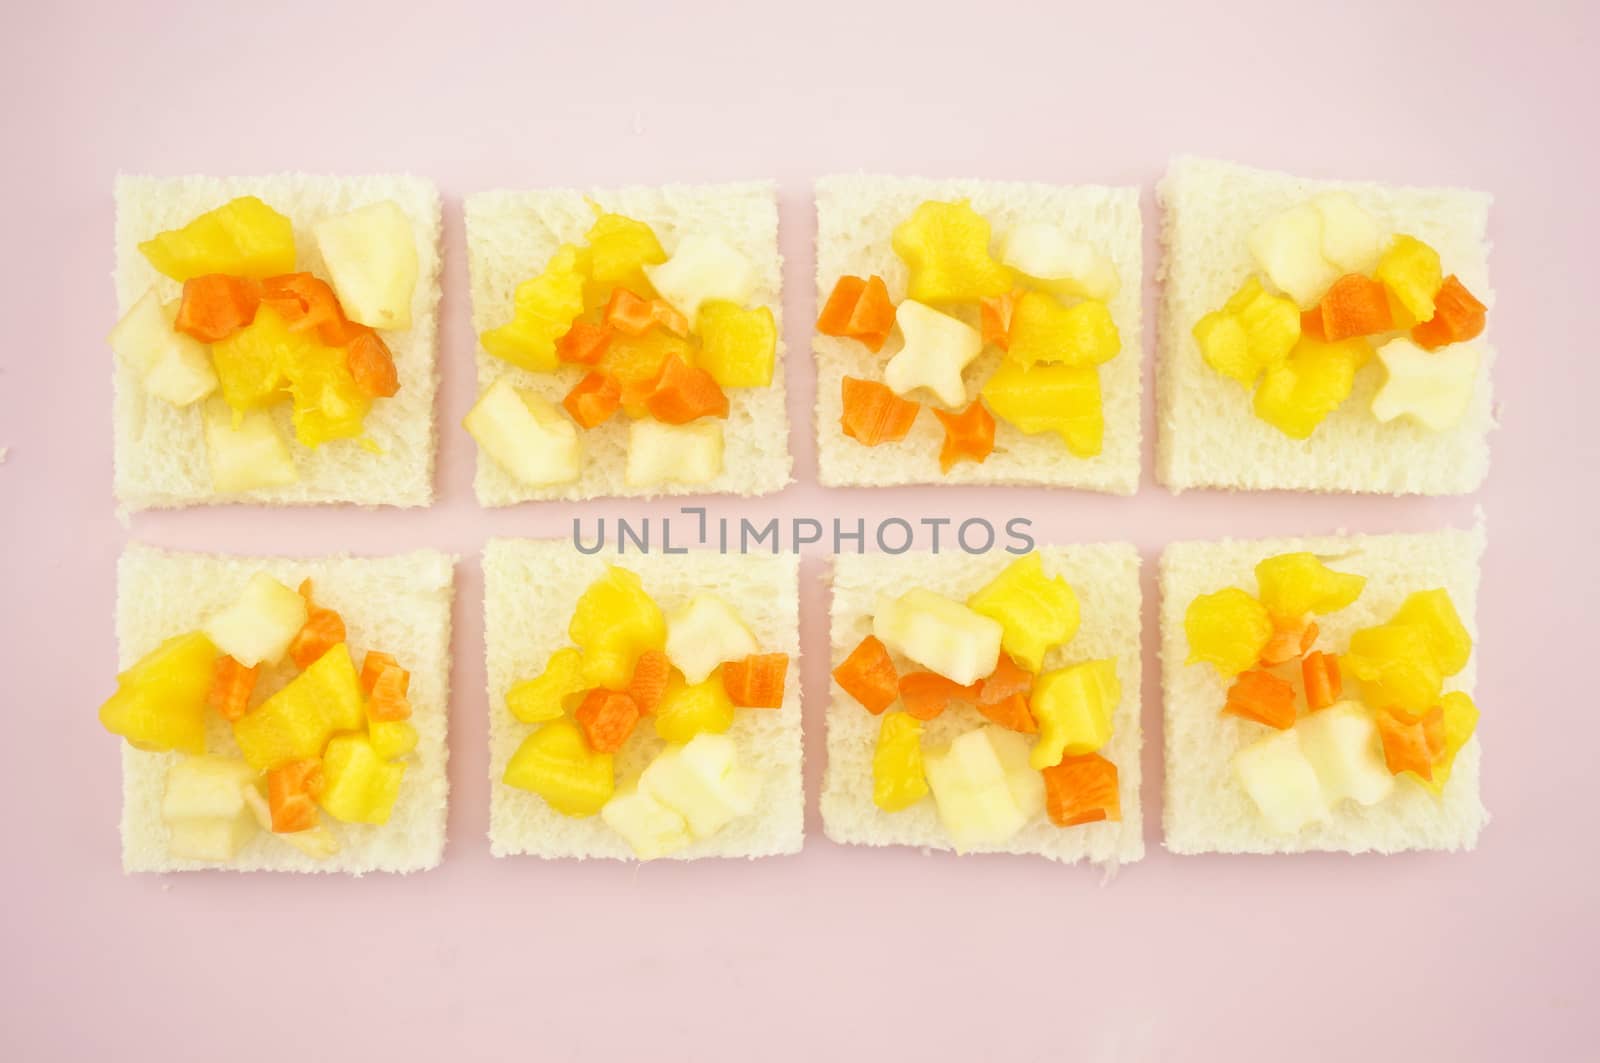 Carrot, Mango and apple sliced put on small bread in row on pink tray.